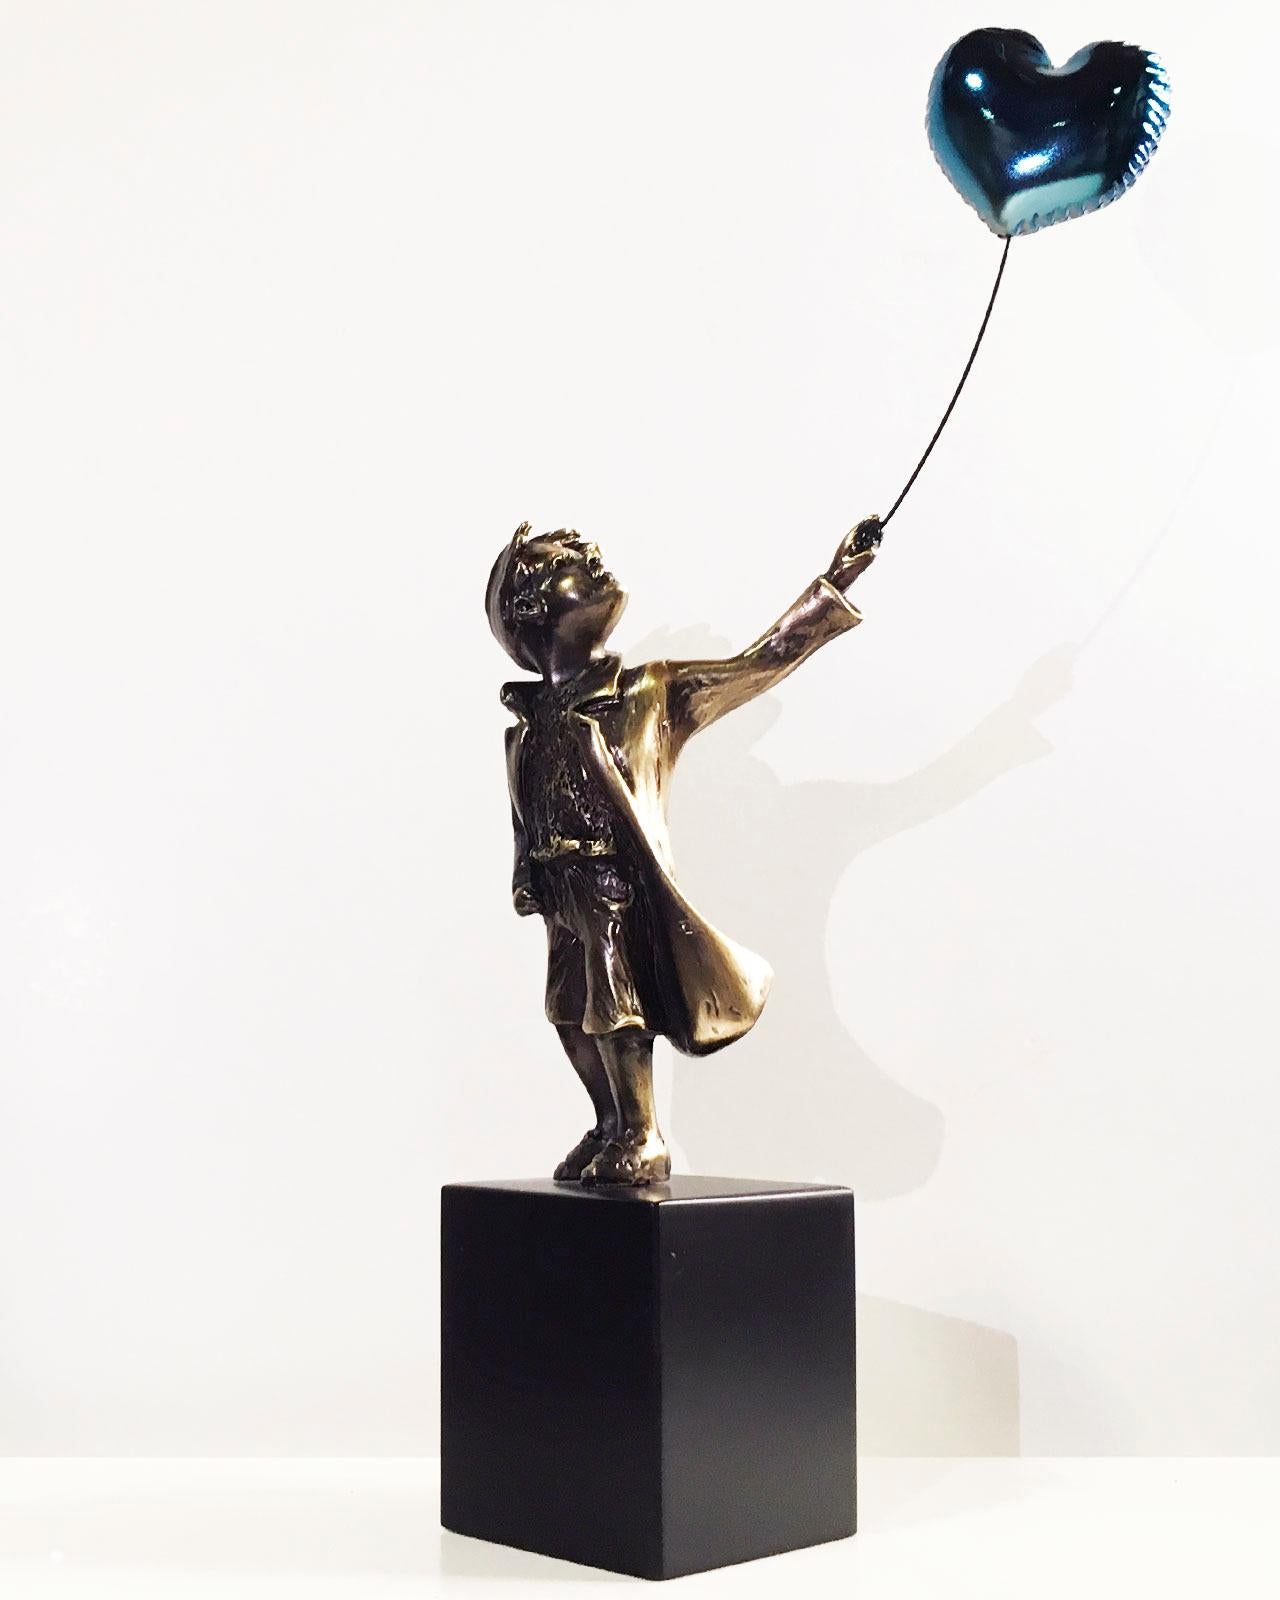 Street Art Sculpture "A boy with balloon" by Miguel Guía.
This sculpture is made by lost wax bronze casting.
Limited edition of 299 works.
Although the required time to deliver a shipment is usually between 3 and 10 days please do not hesitate to